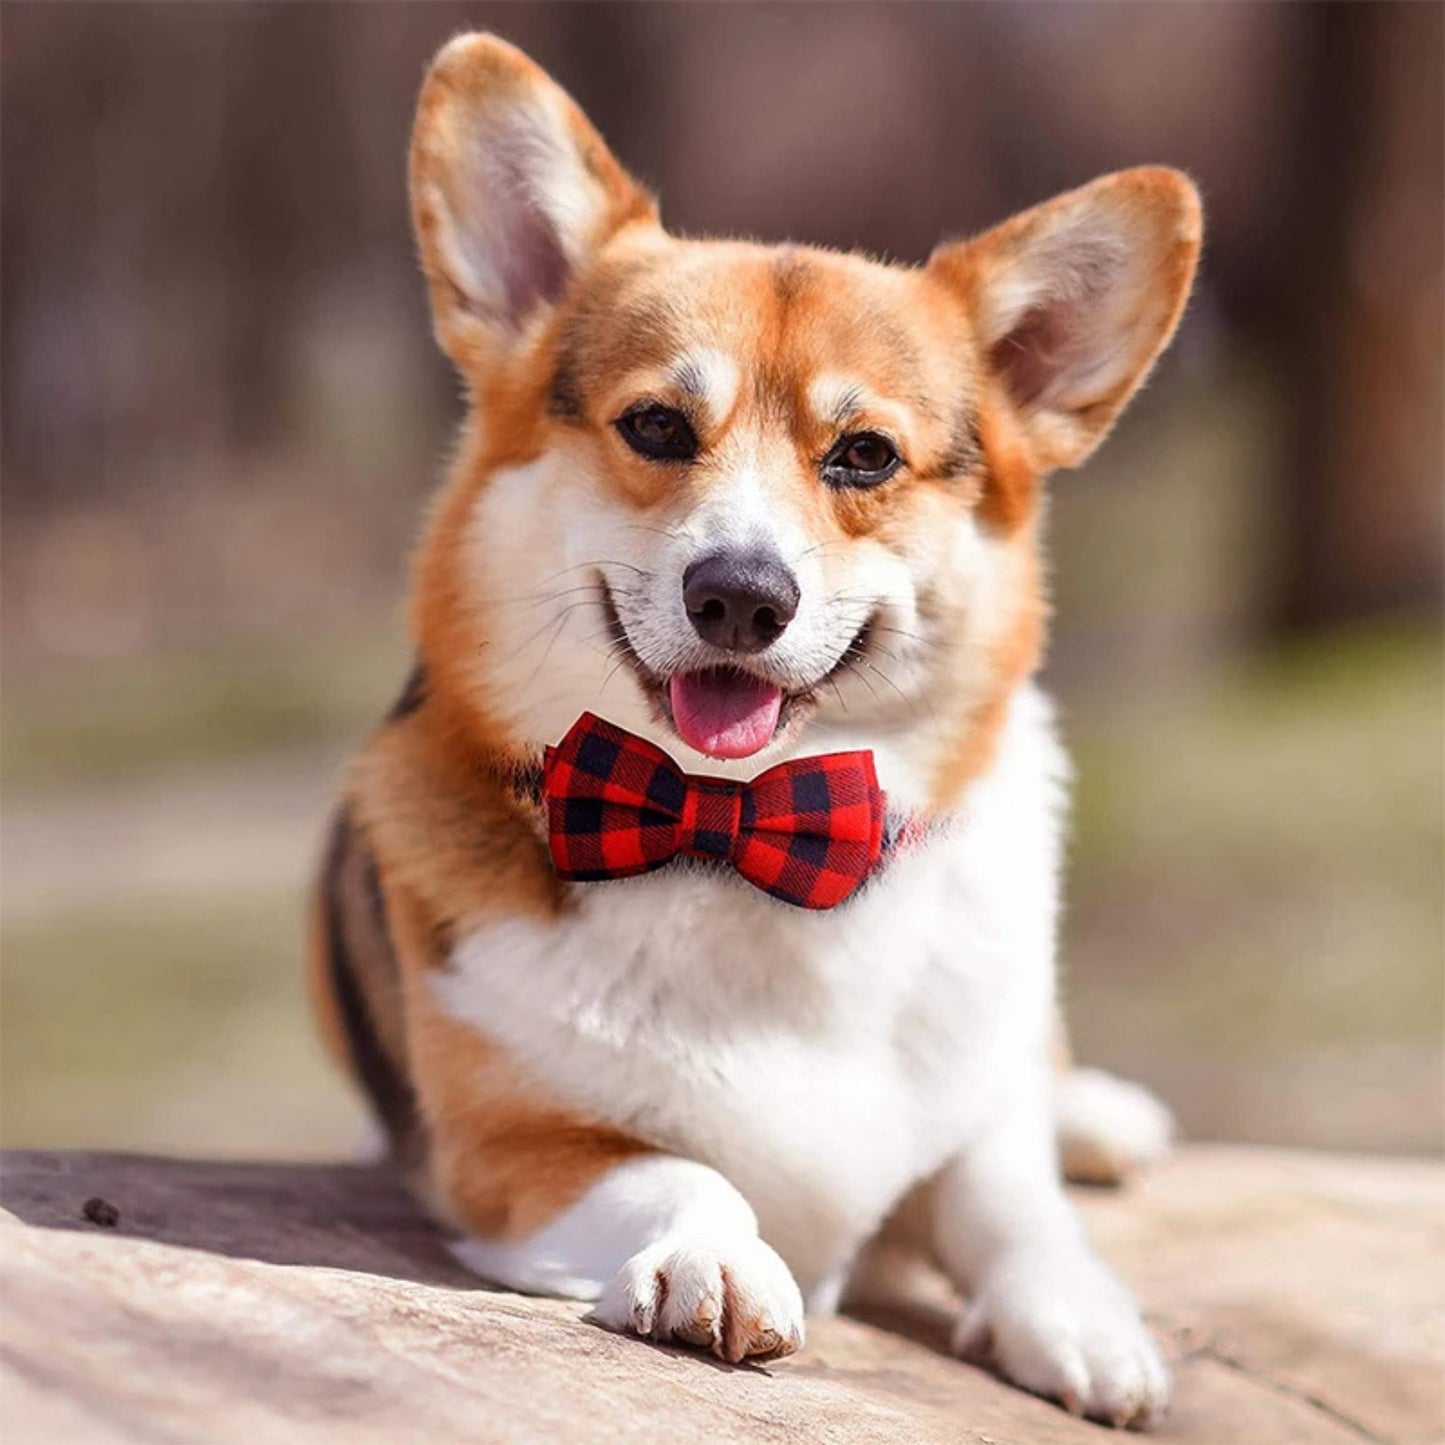 Dog Bow Tie  Collar Bowtie For Dogs